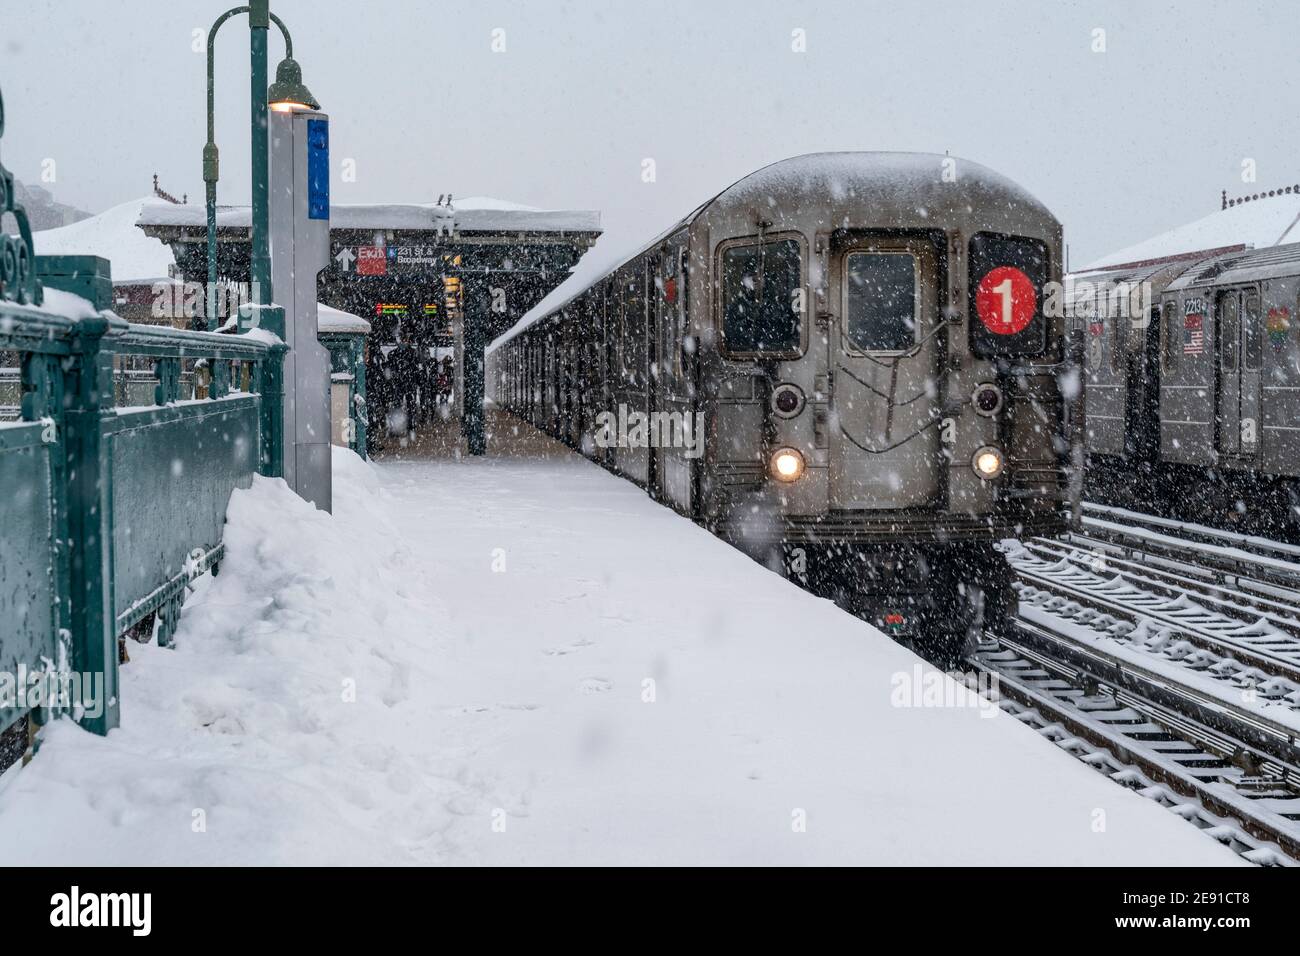 New York, NY - February 1, 2021: View of subway train on elevated above ground station covered with snow as major storm cover New York City with more than a foot expected on the ground Stock Photo